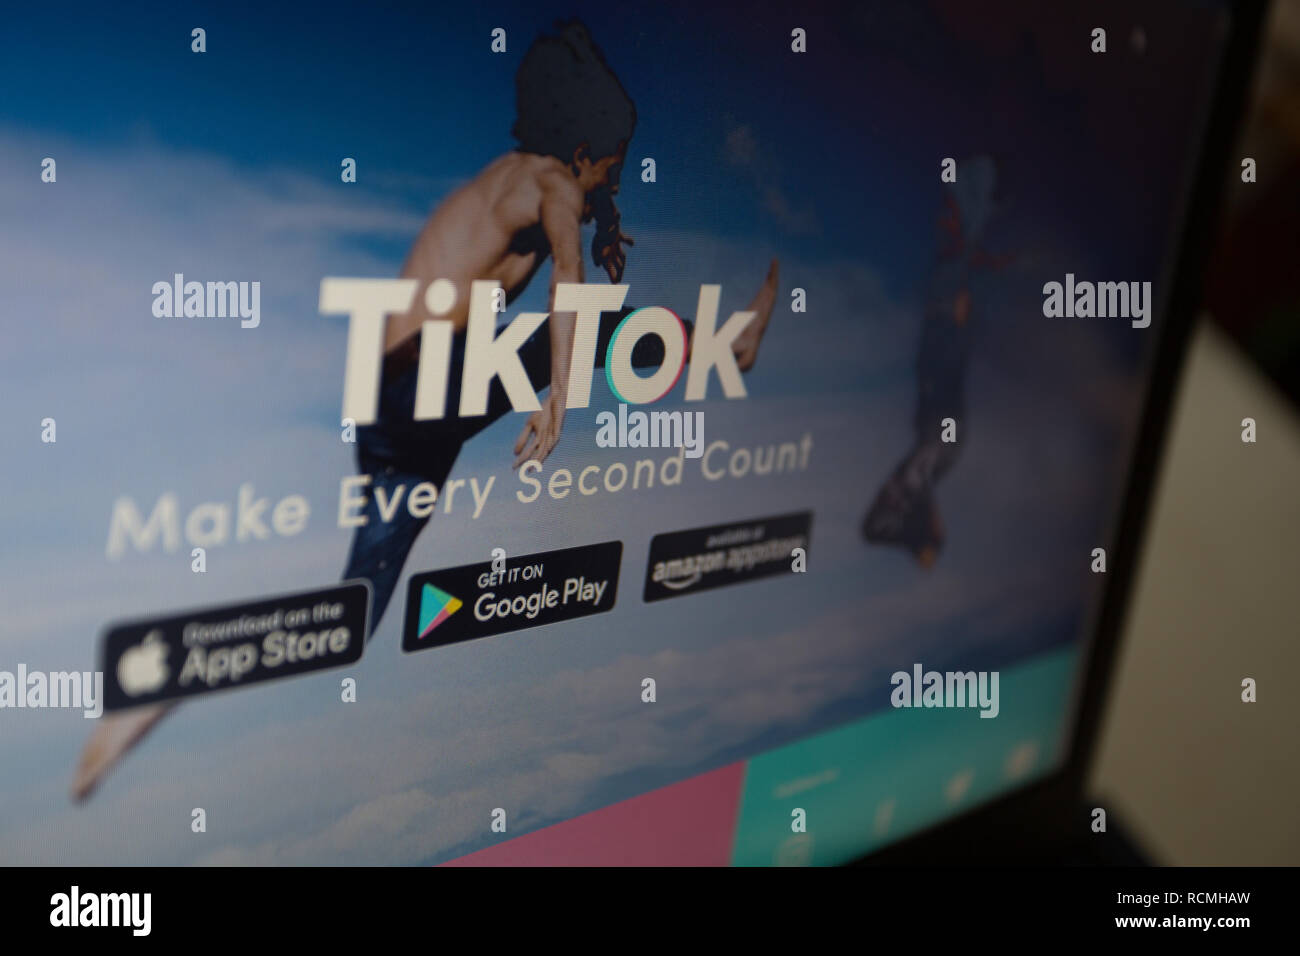 TikTok, a.k.a. Douyin in China, is a media app for creating and sharing short videos. Logo on its website is shown on a laptop computer screen Stock Photo